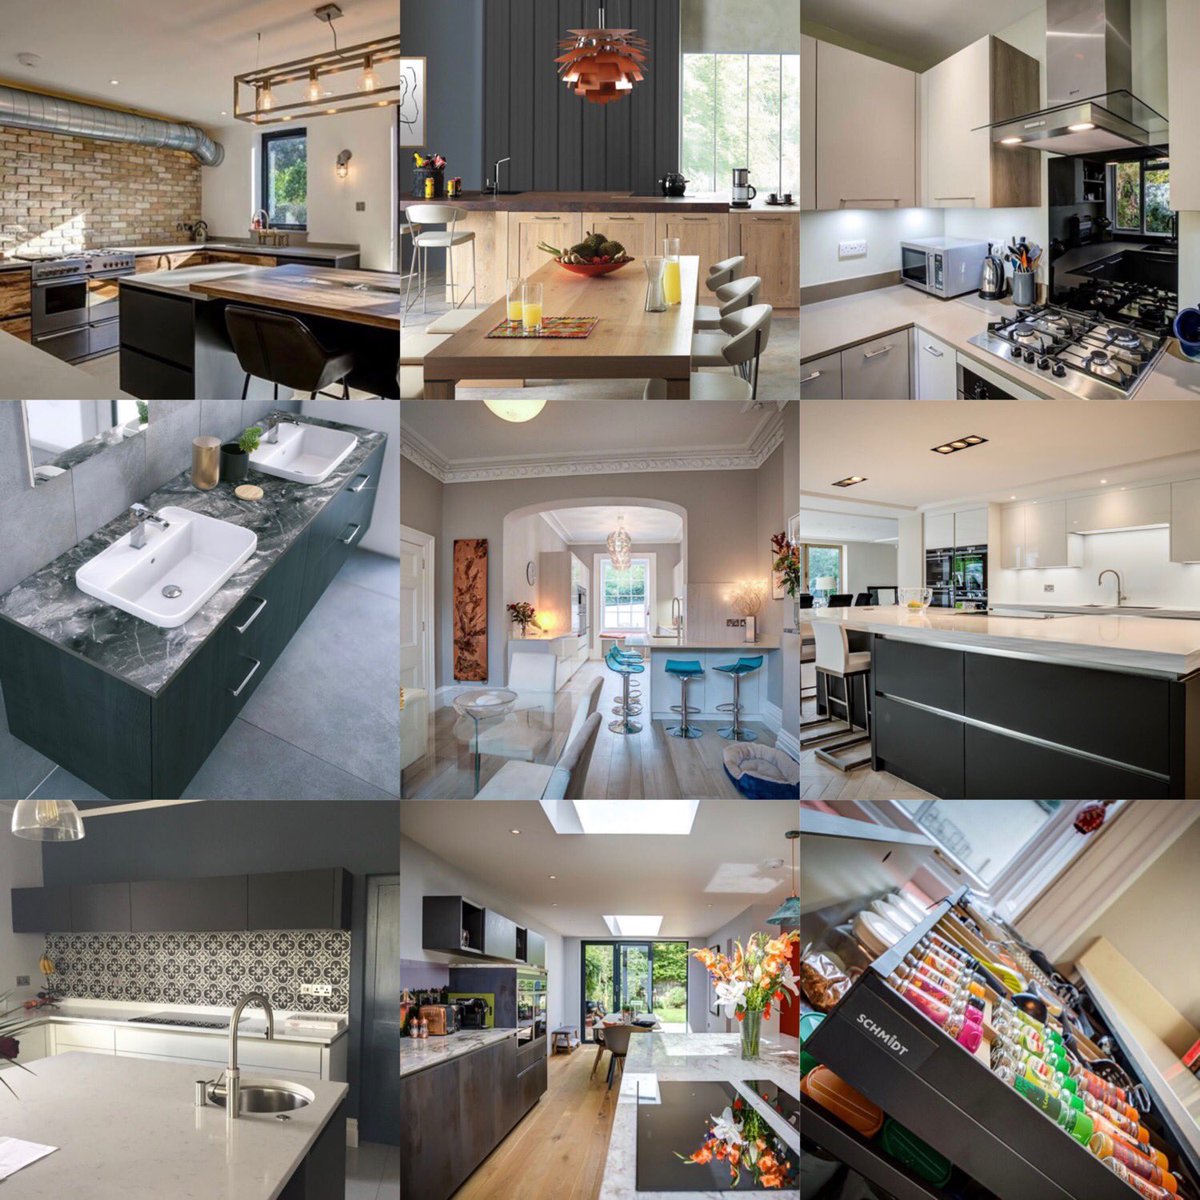 Looking forward to more of this in 2019 #kitchendesign #homedesign